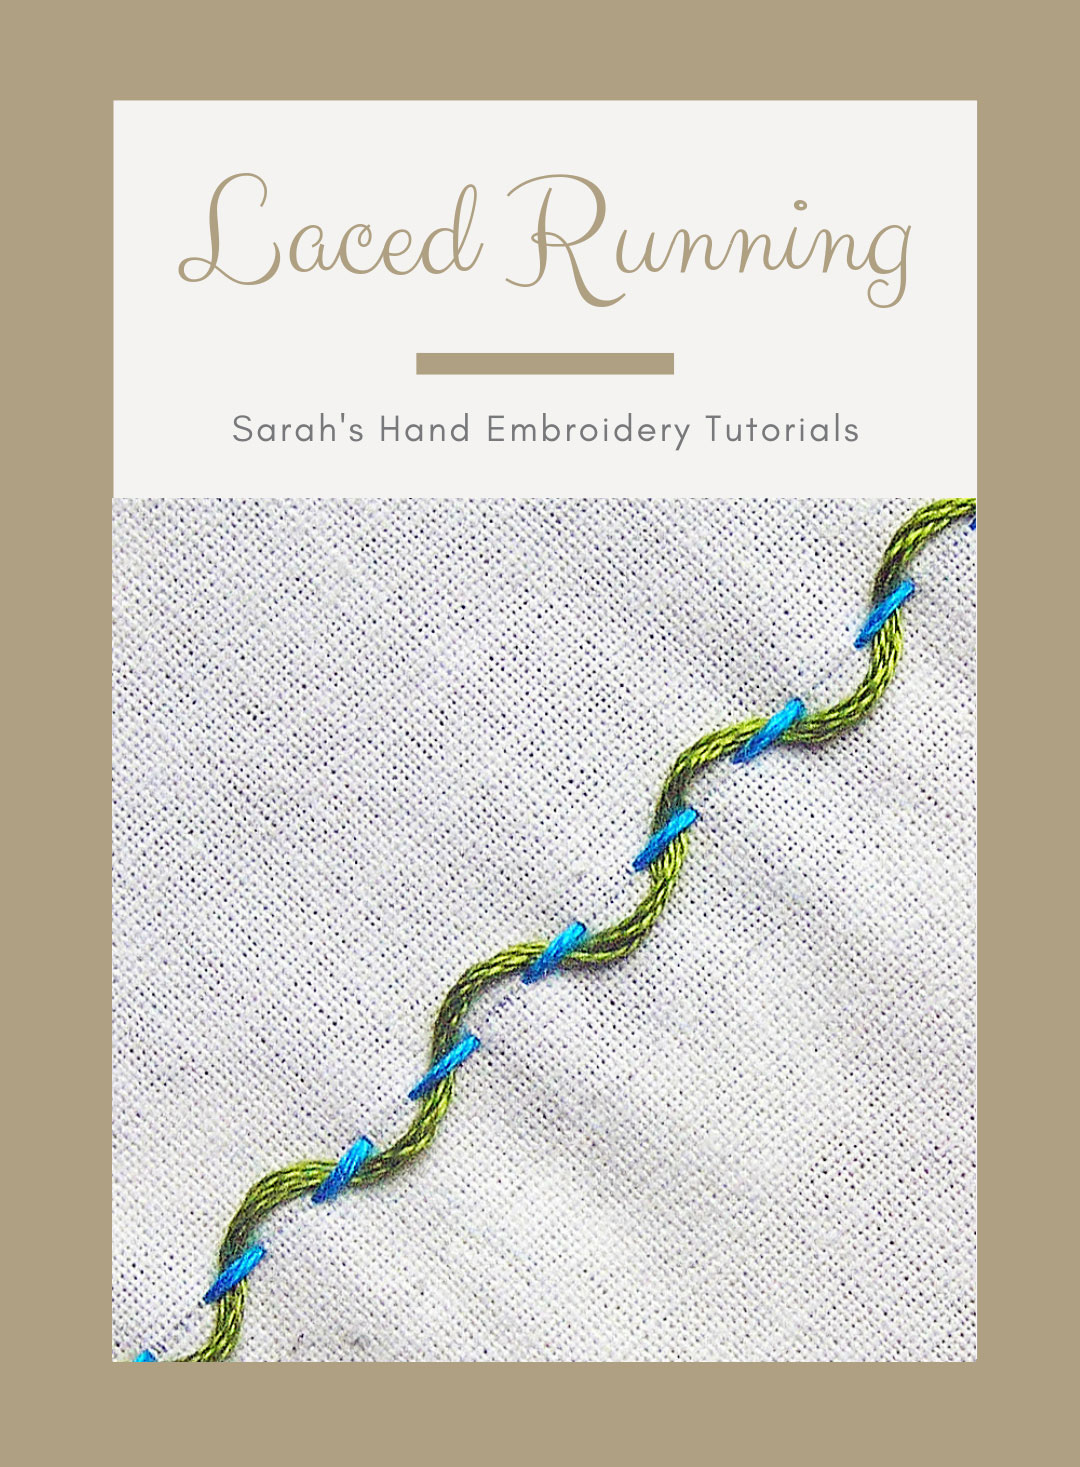 Laced Running Stitch In Embroidery | Hand Embroidery